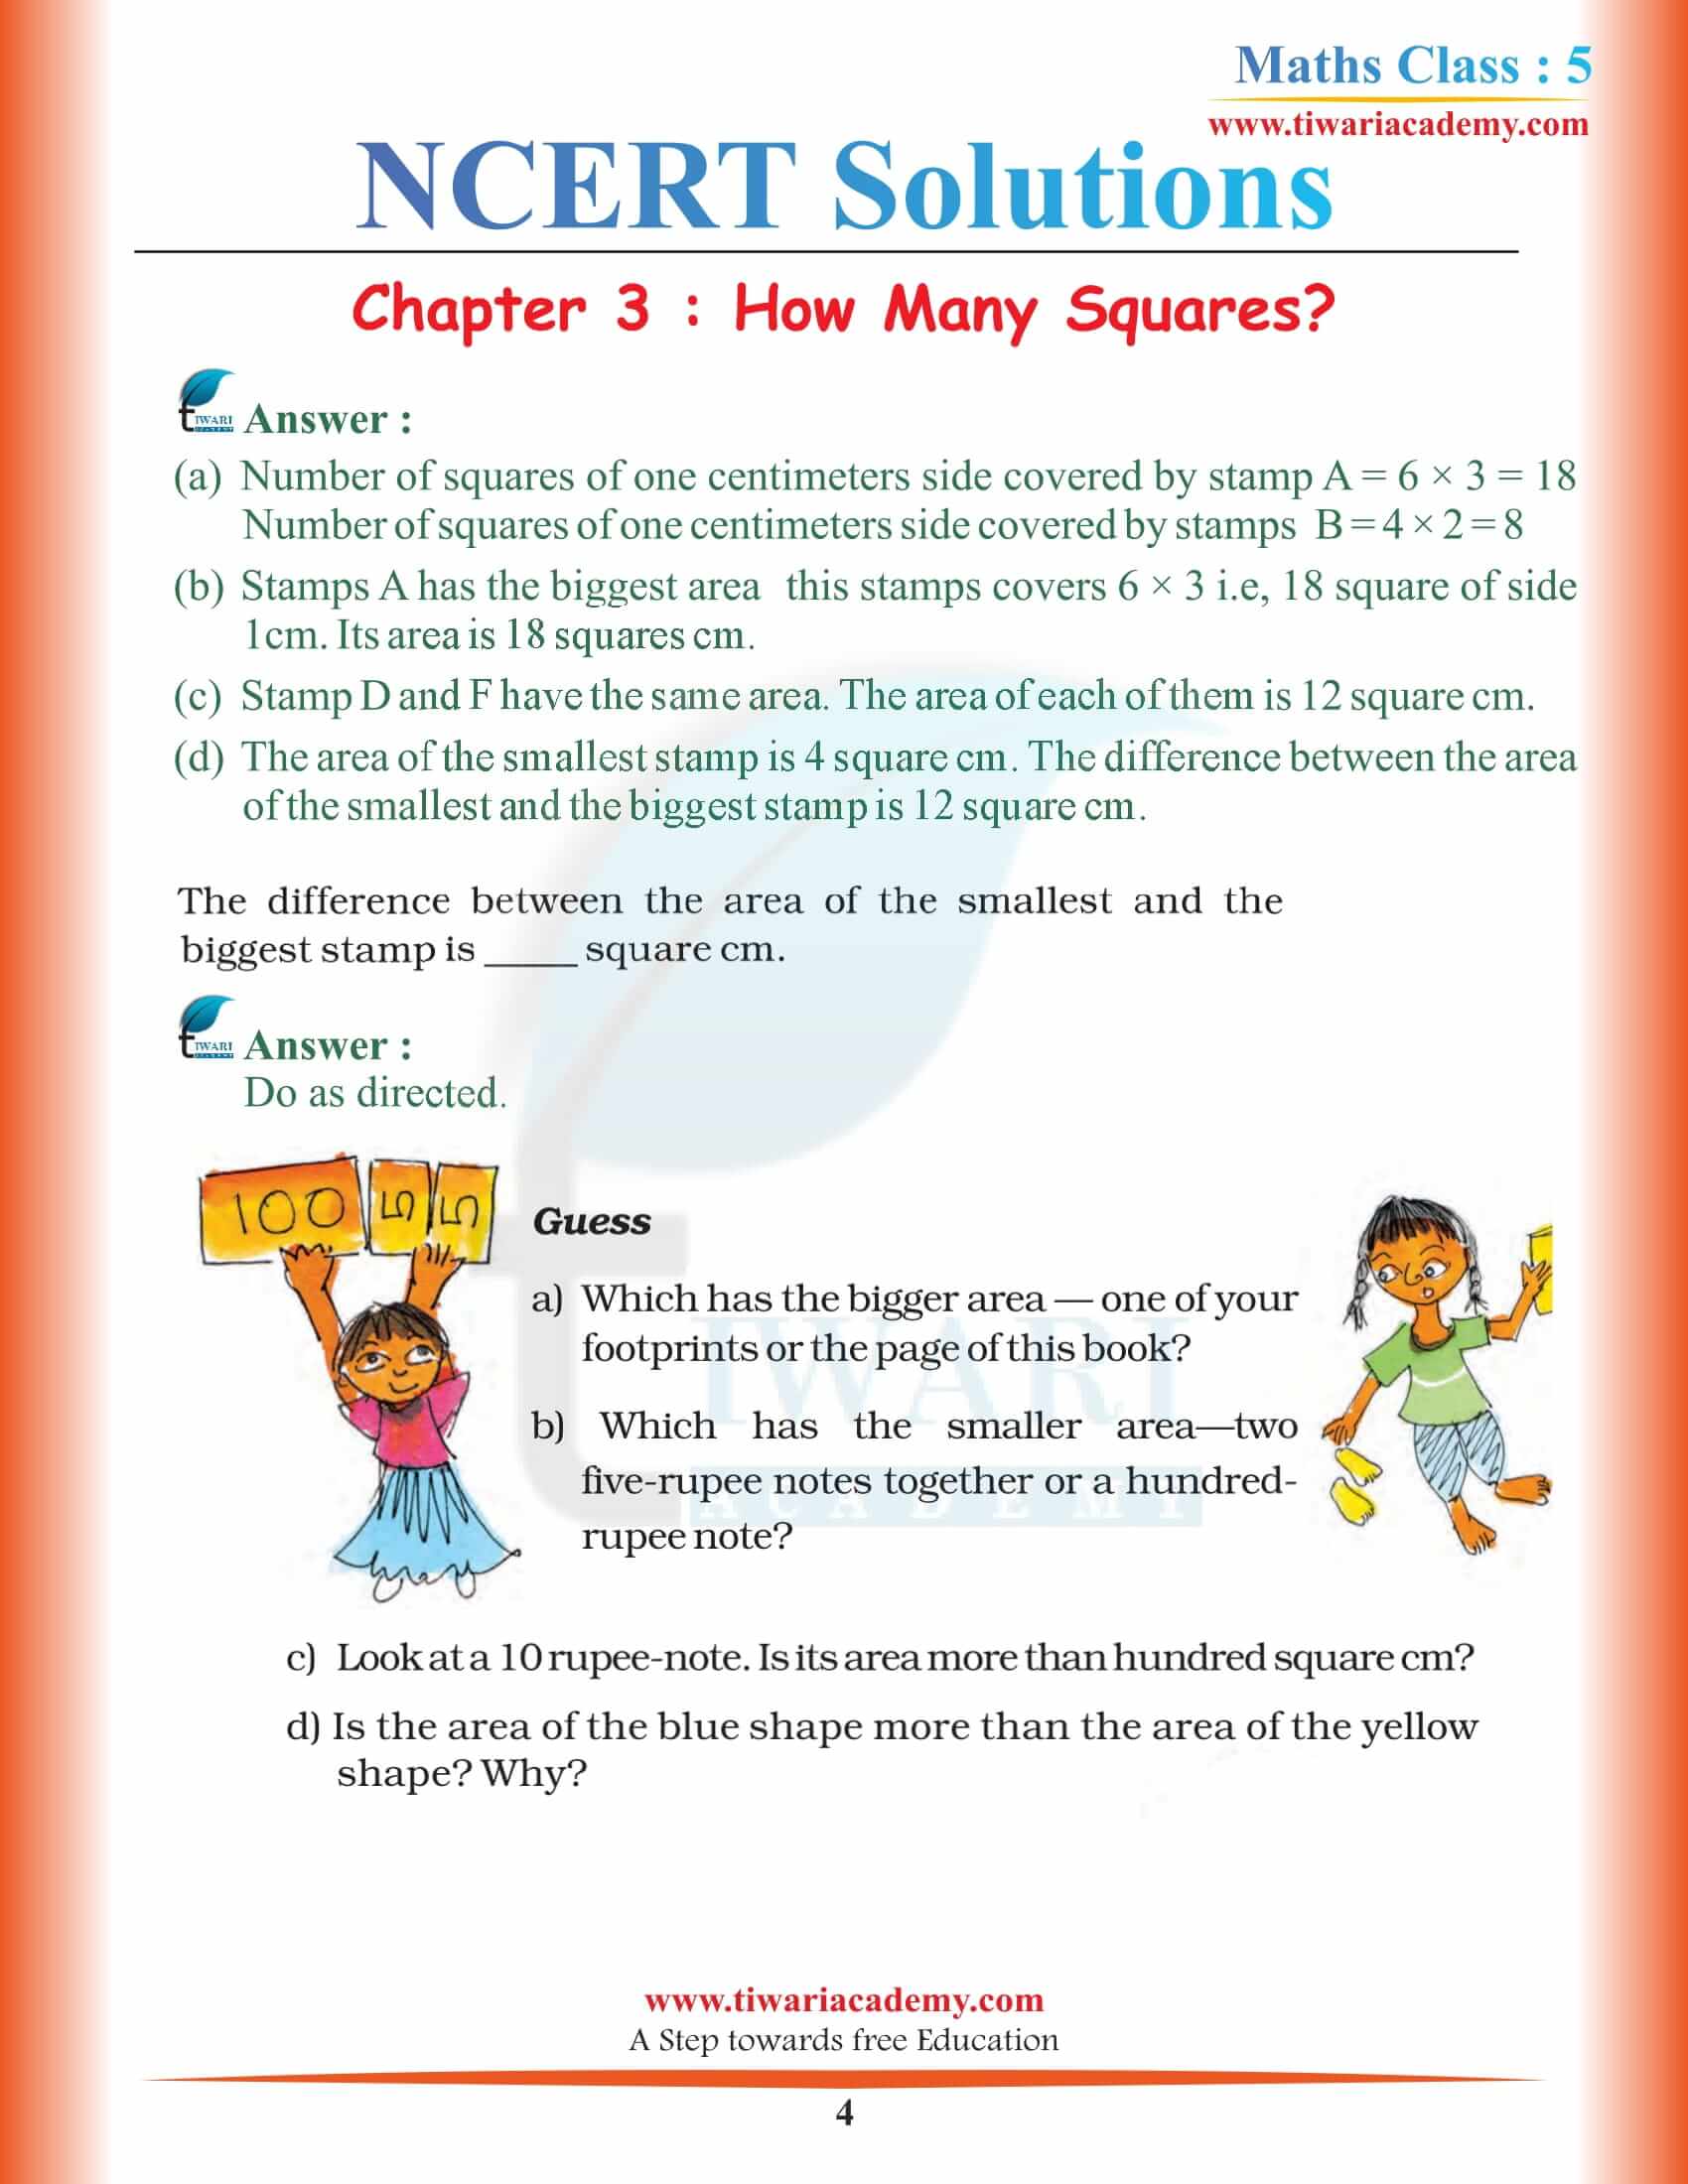 NCERT Solutions for Class 5 Maths Chapter 3 answers